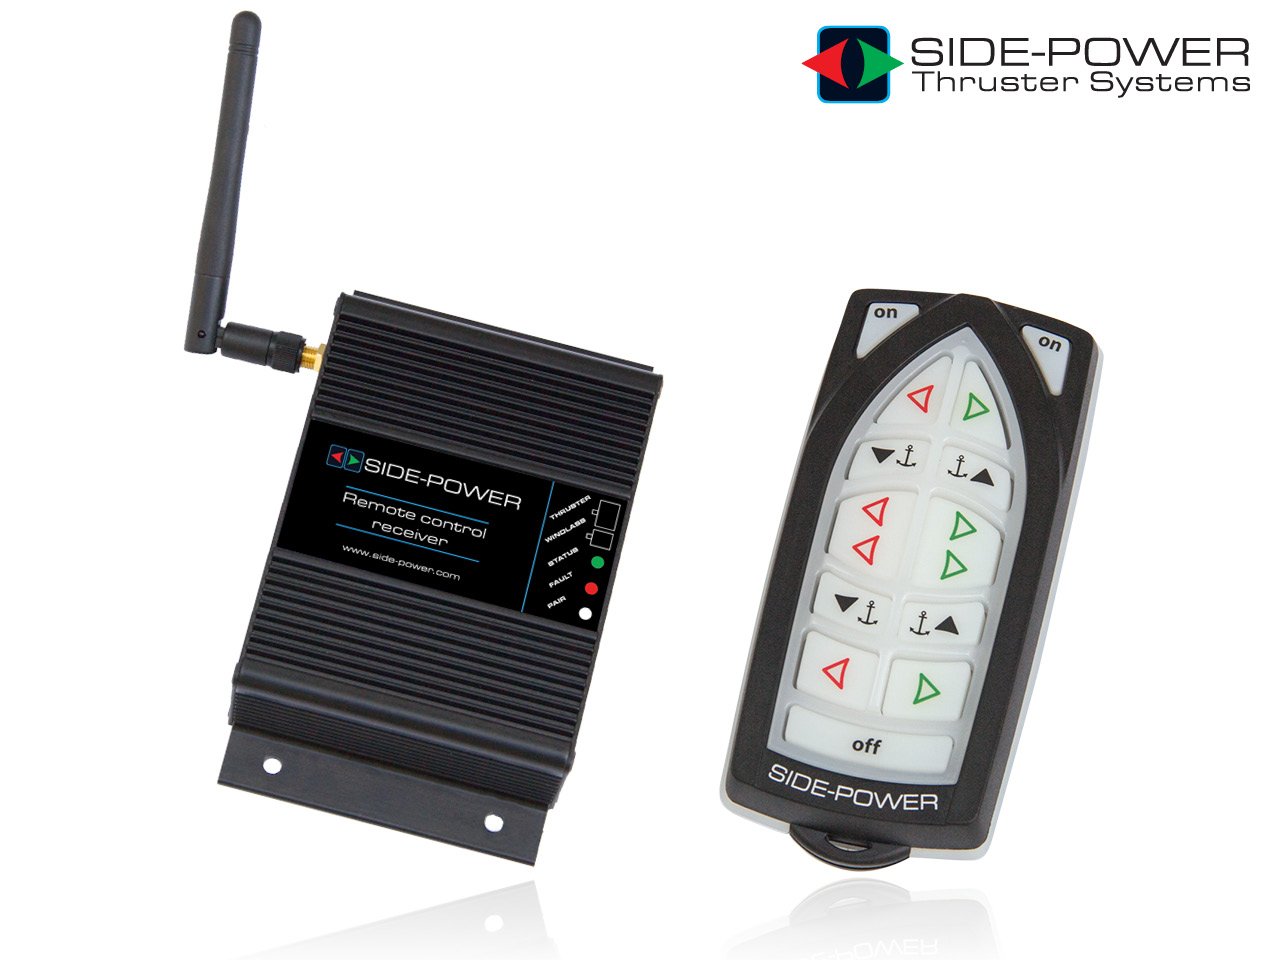 Side-Power Remote Control Kit